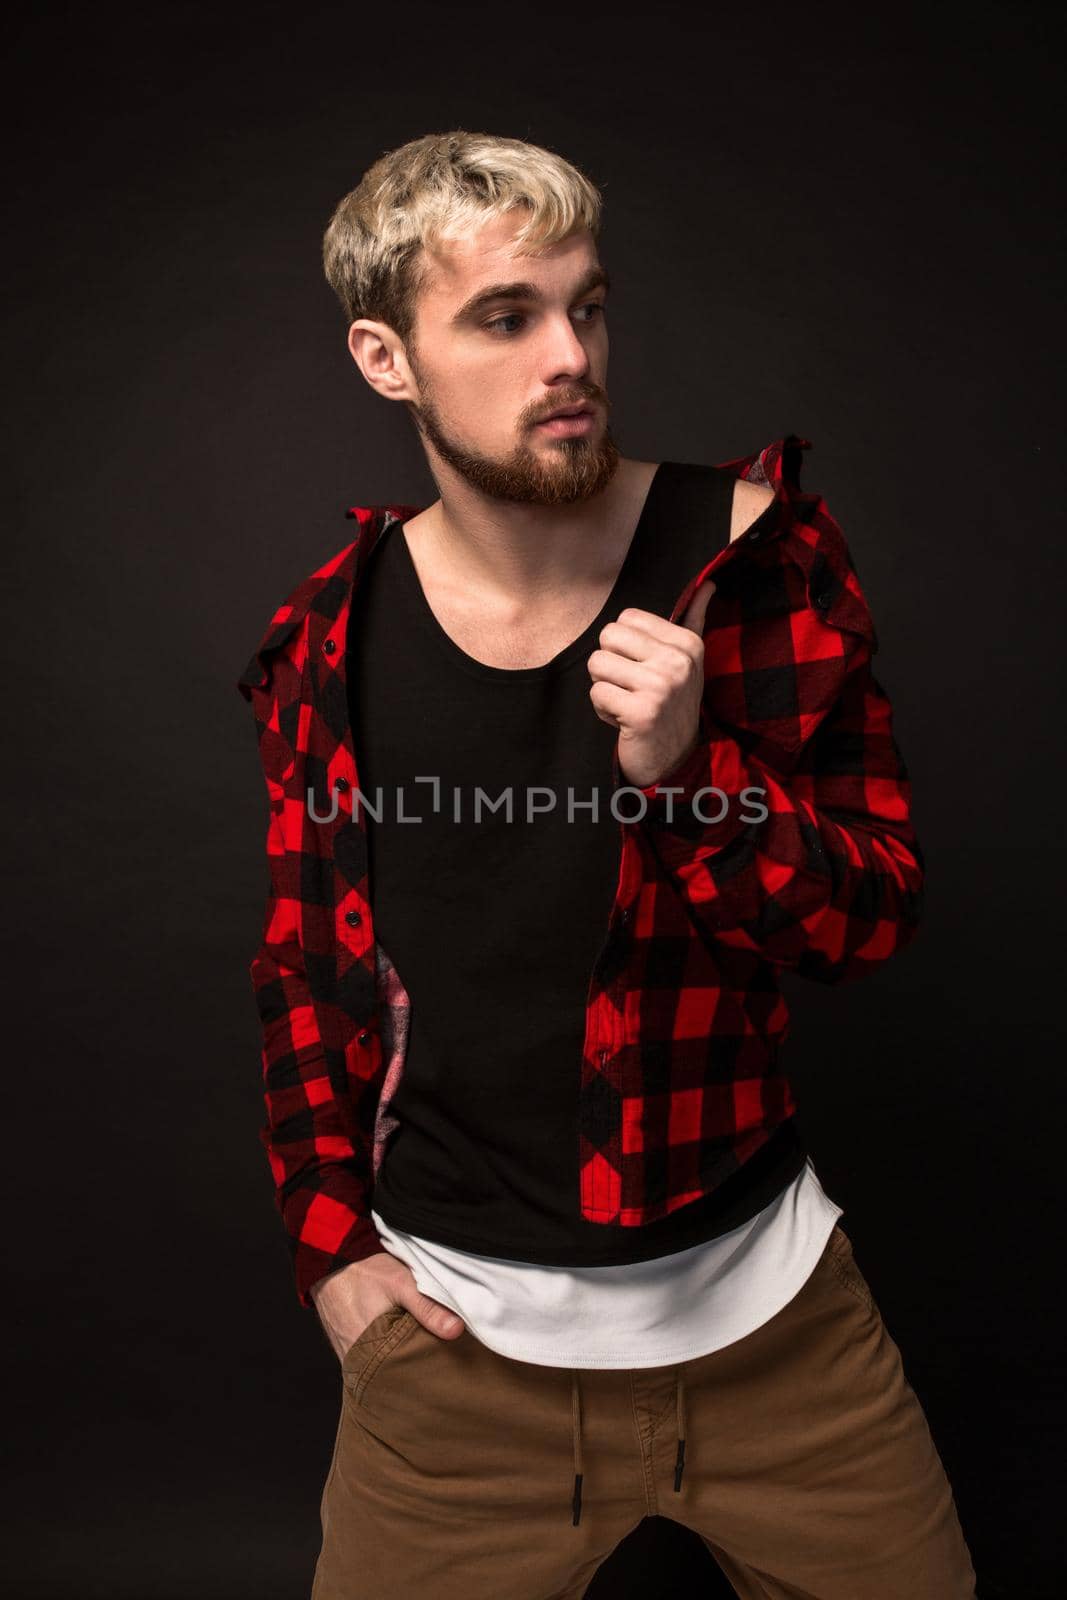 Close-up portrait of attractive young bearded hipster man dressed in shirt in a cage isolated over black background. Studio shot